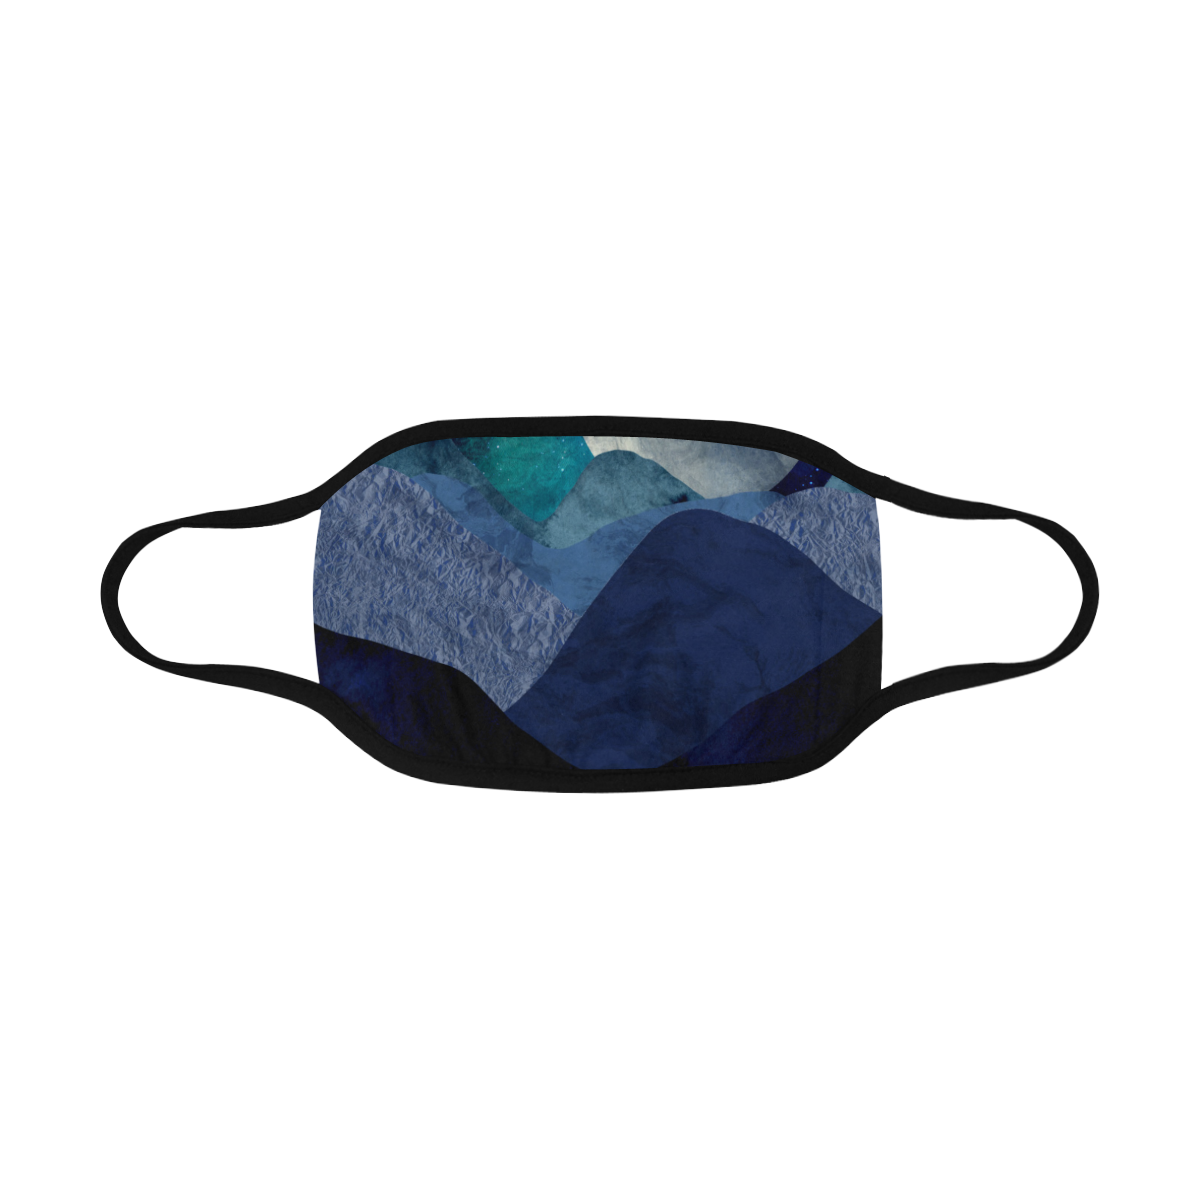 Night In The Mountains Mouth Mask